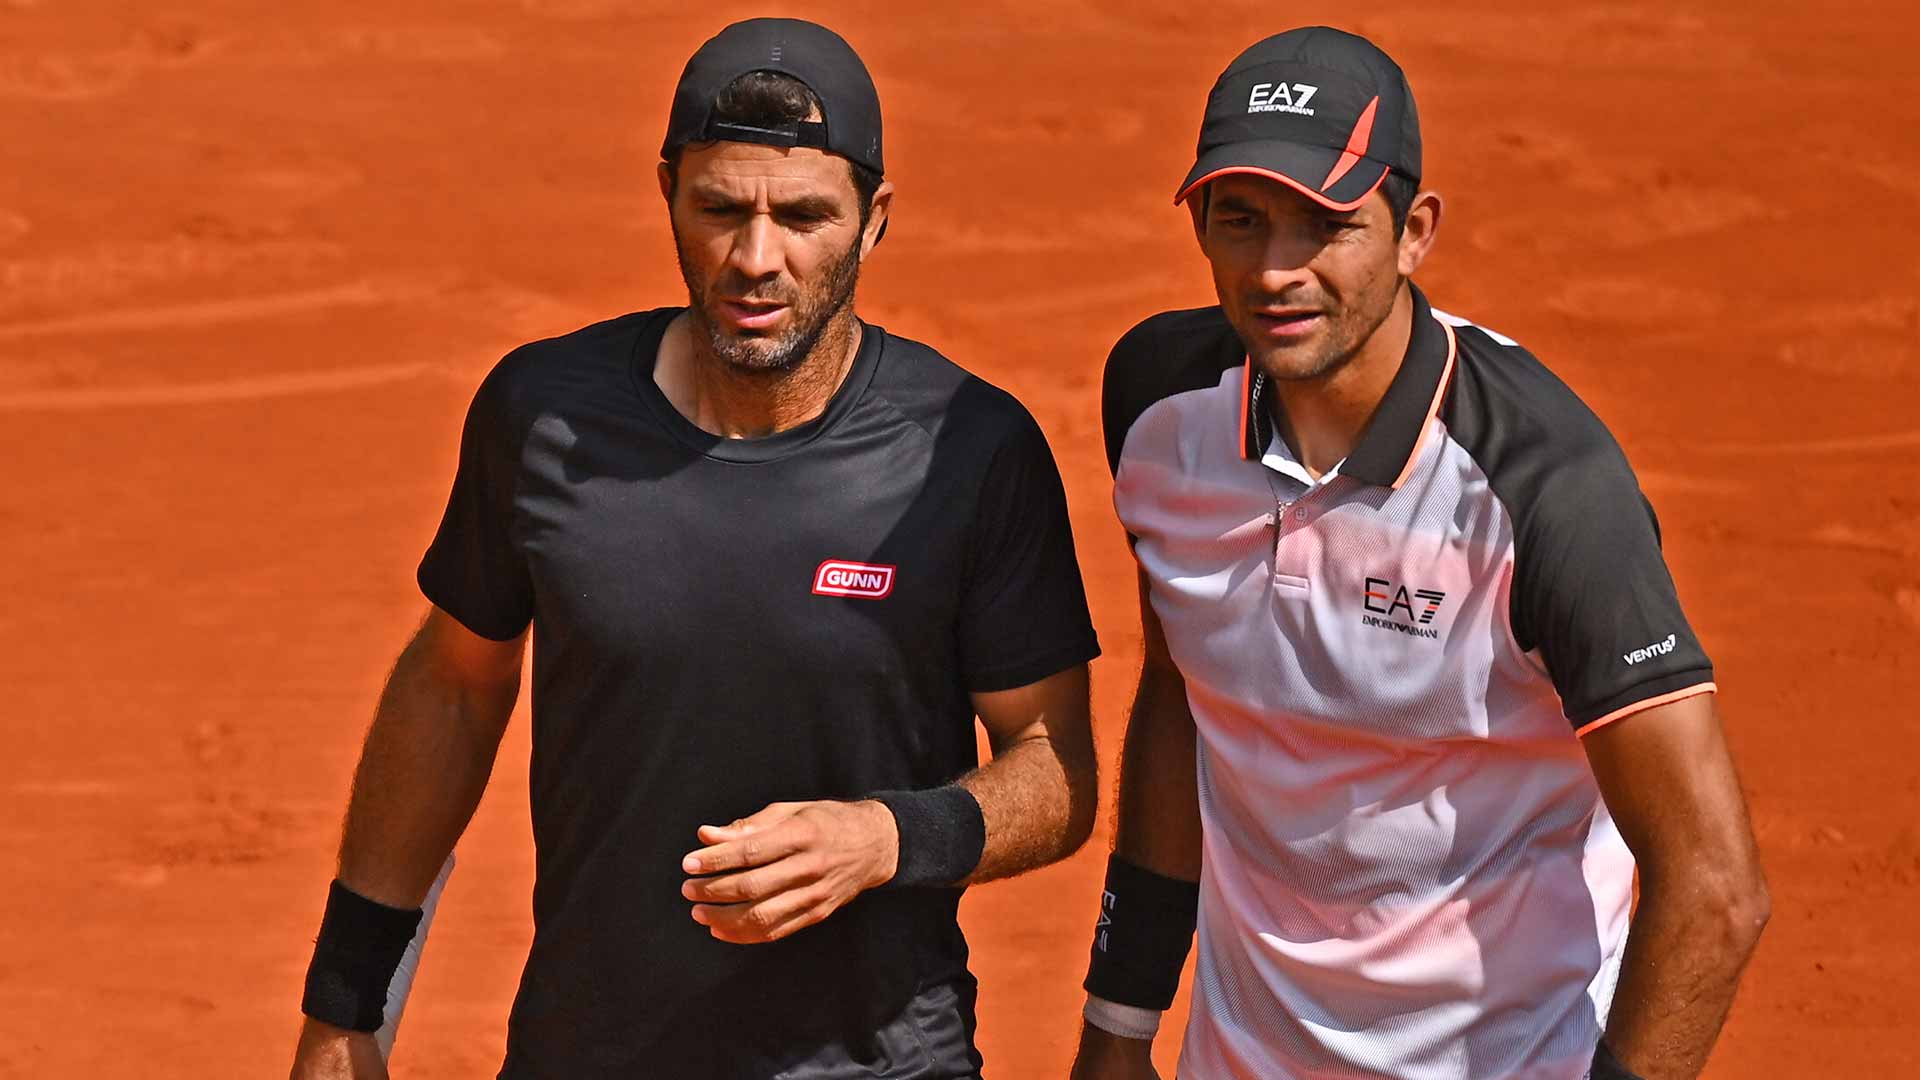 Jean-Julien Rojer and Marcelo Arevalo